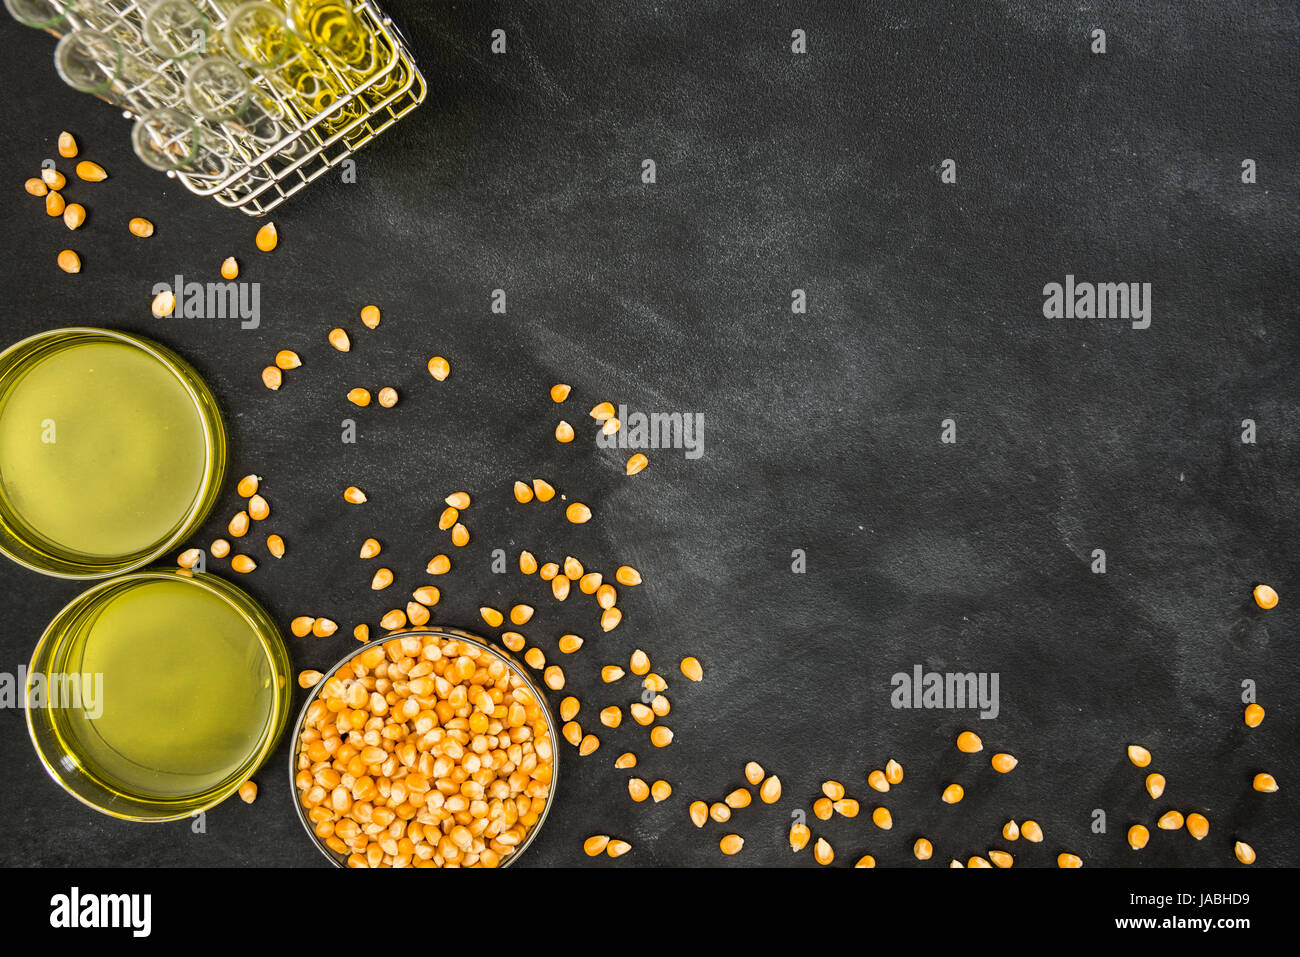 research on gold corn energy food through the particles in the laboratory testing with test tubes on the black board writing the report using chalk on Stock Photo